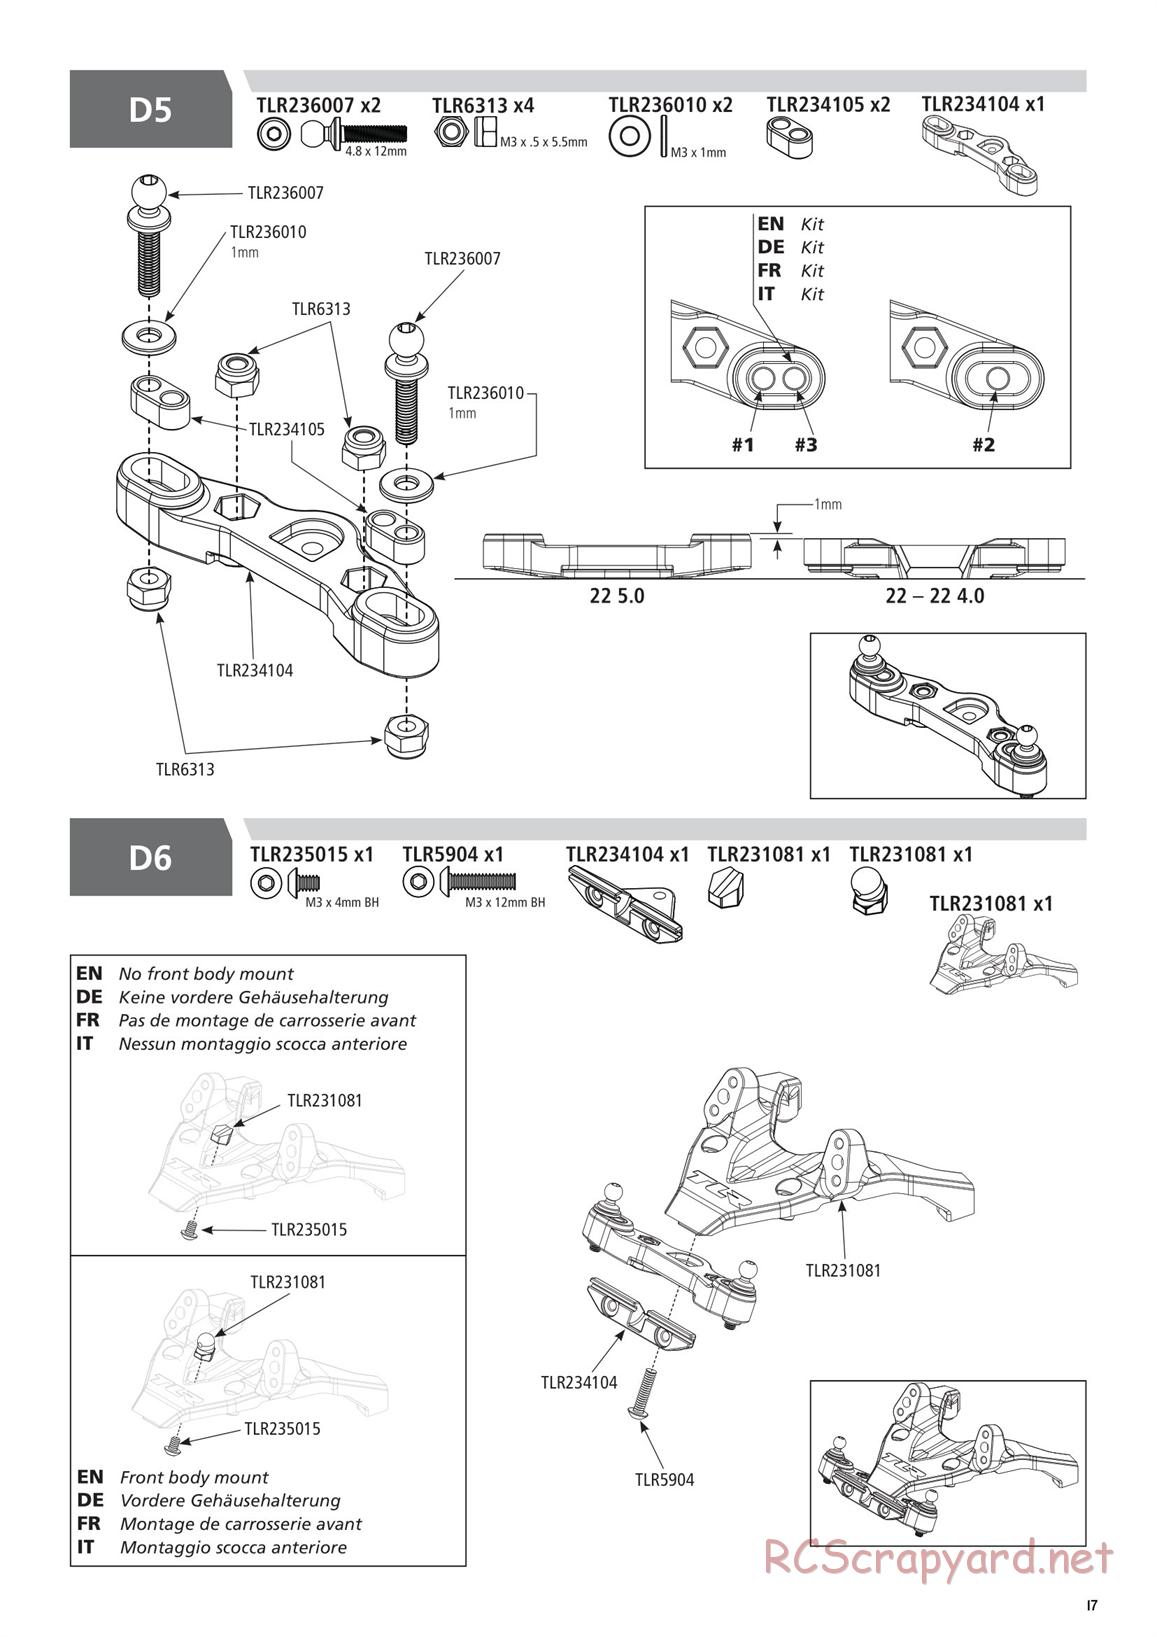 Team Losi - TLR 22 5.0 AC Race - Manual - Page 17